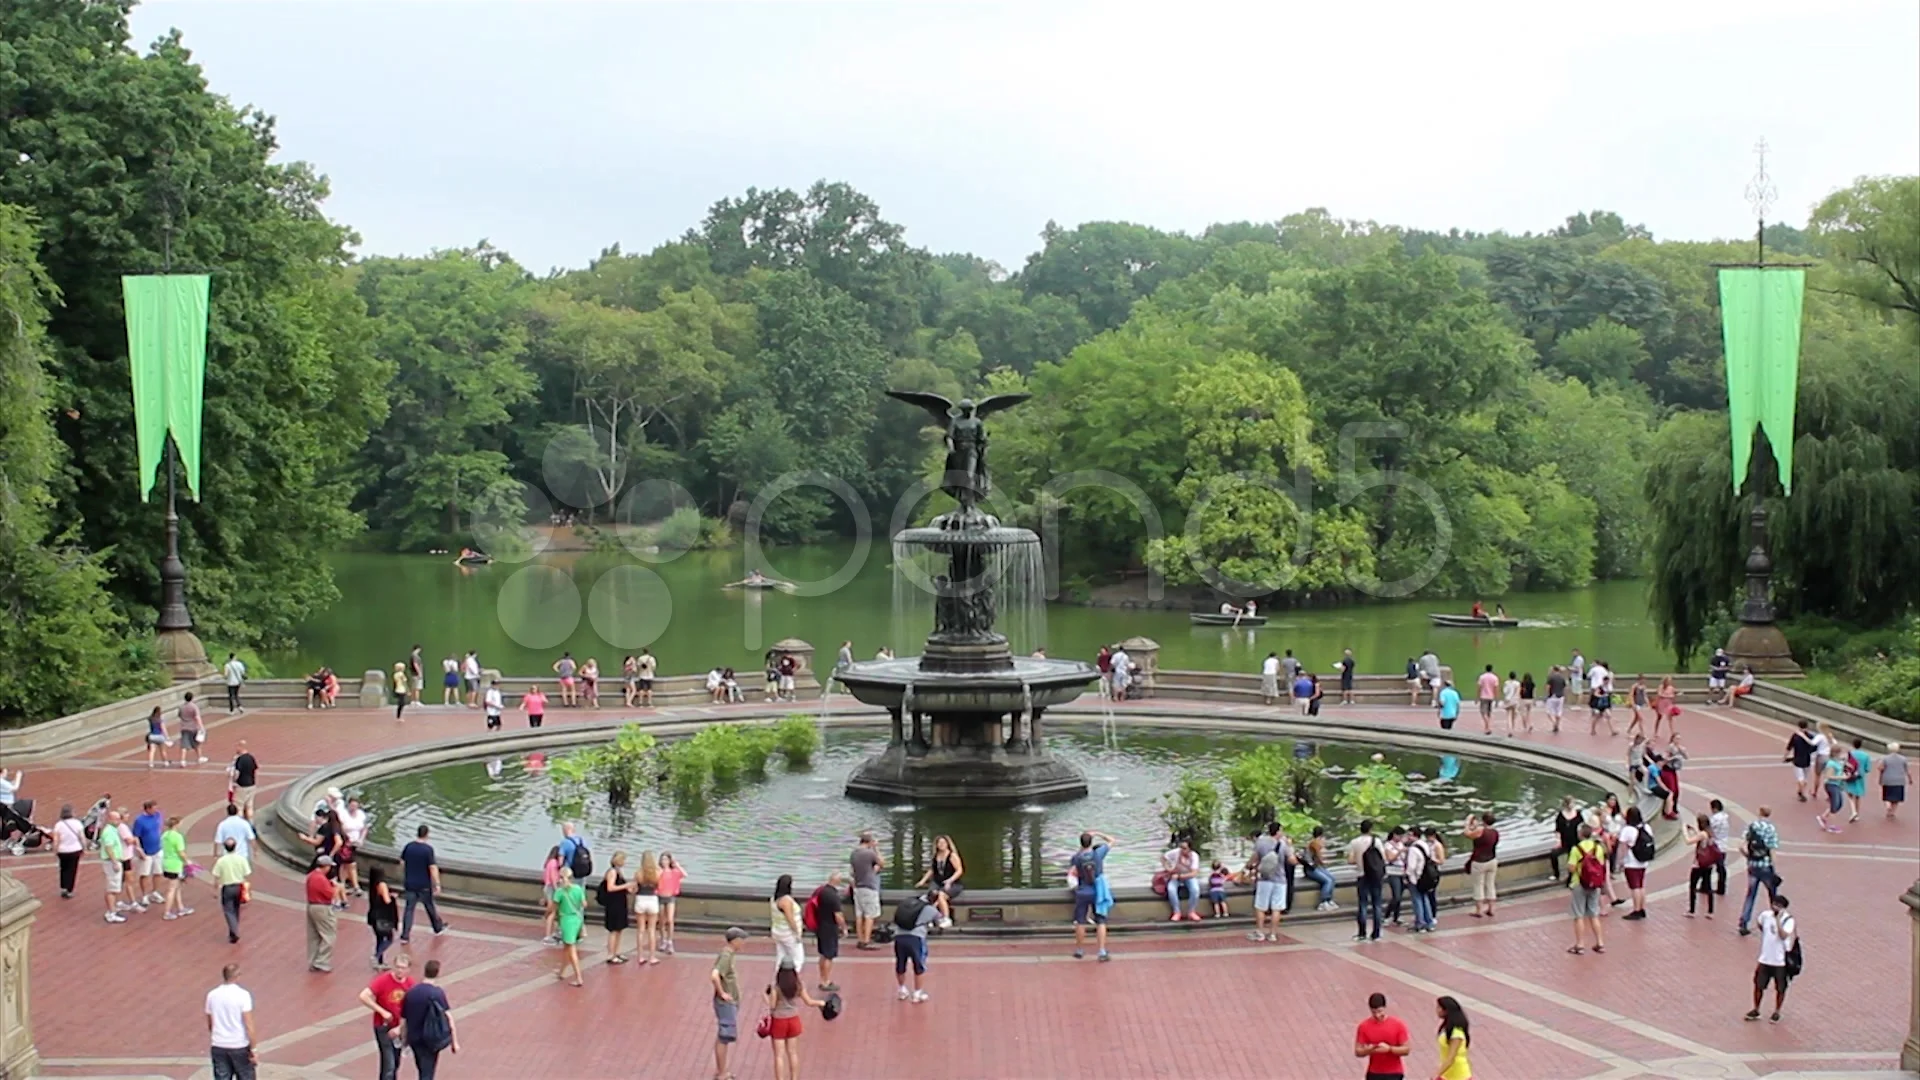 Bethesda Fountain with people view from the terrace in Central